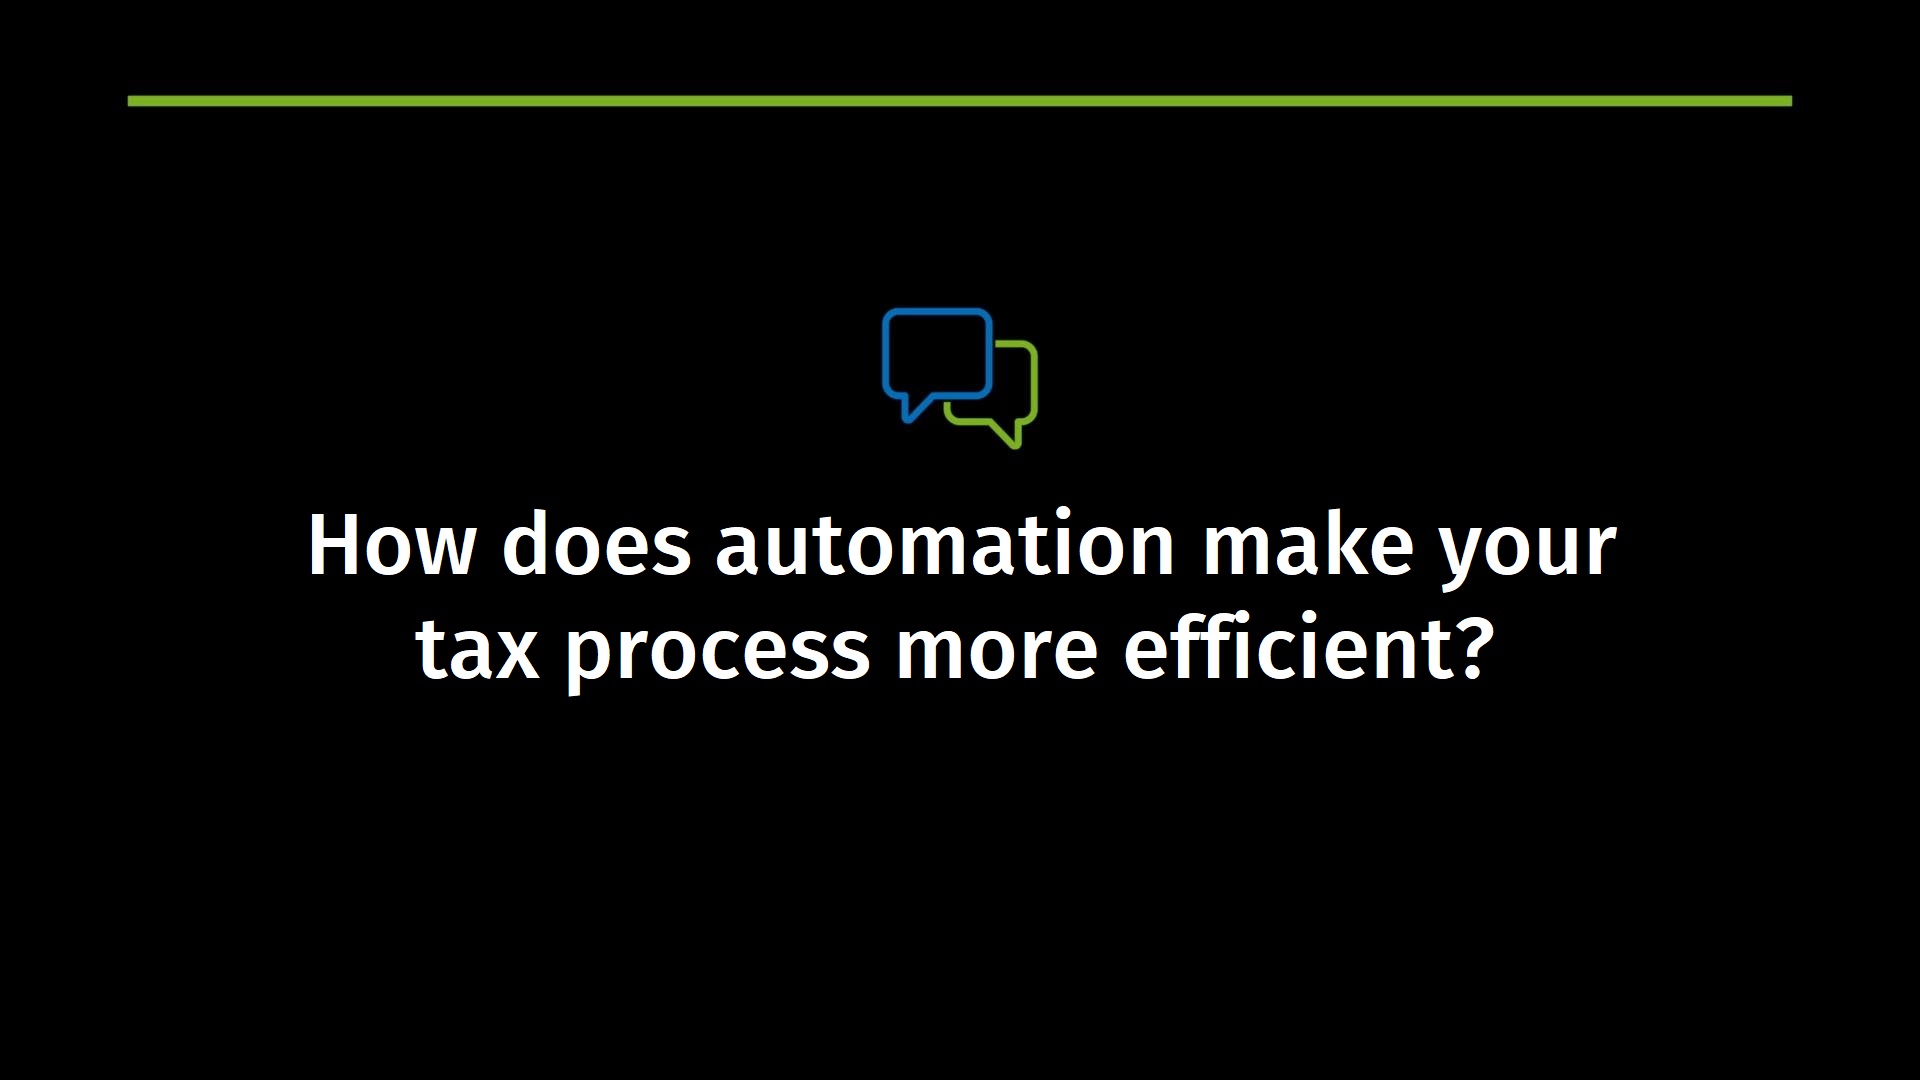 How does automation make your tax process more efficient?